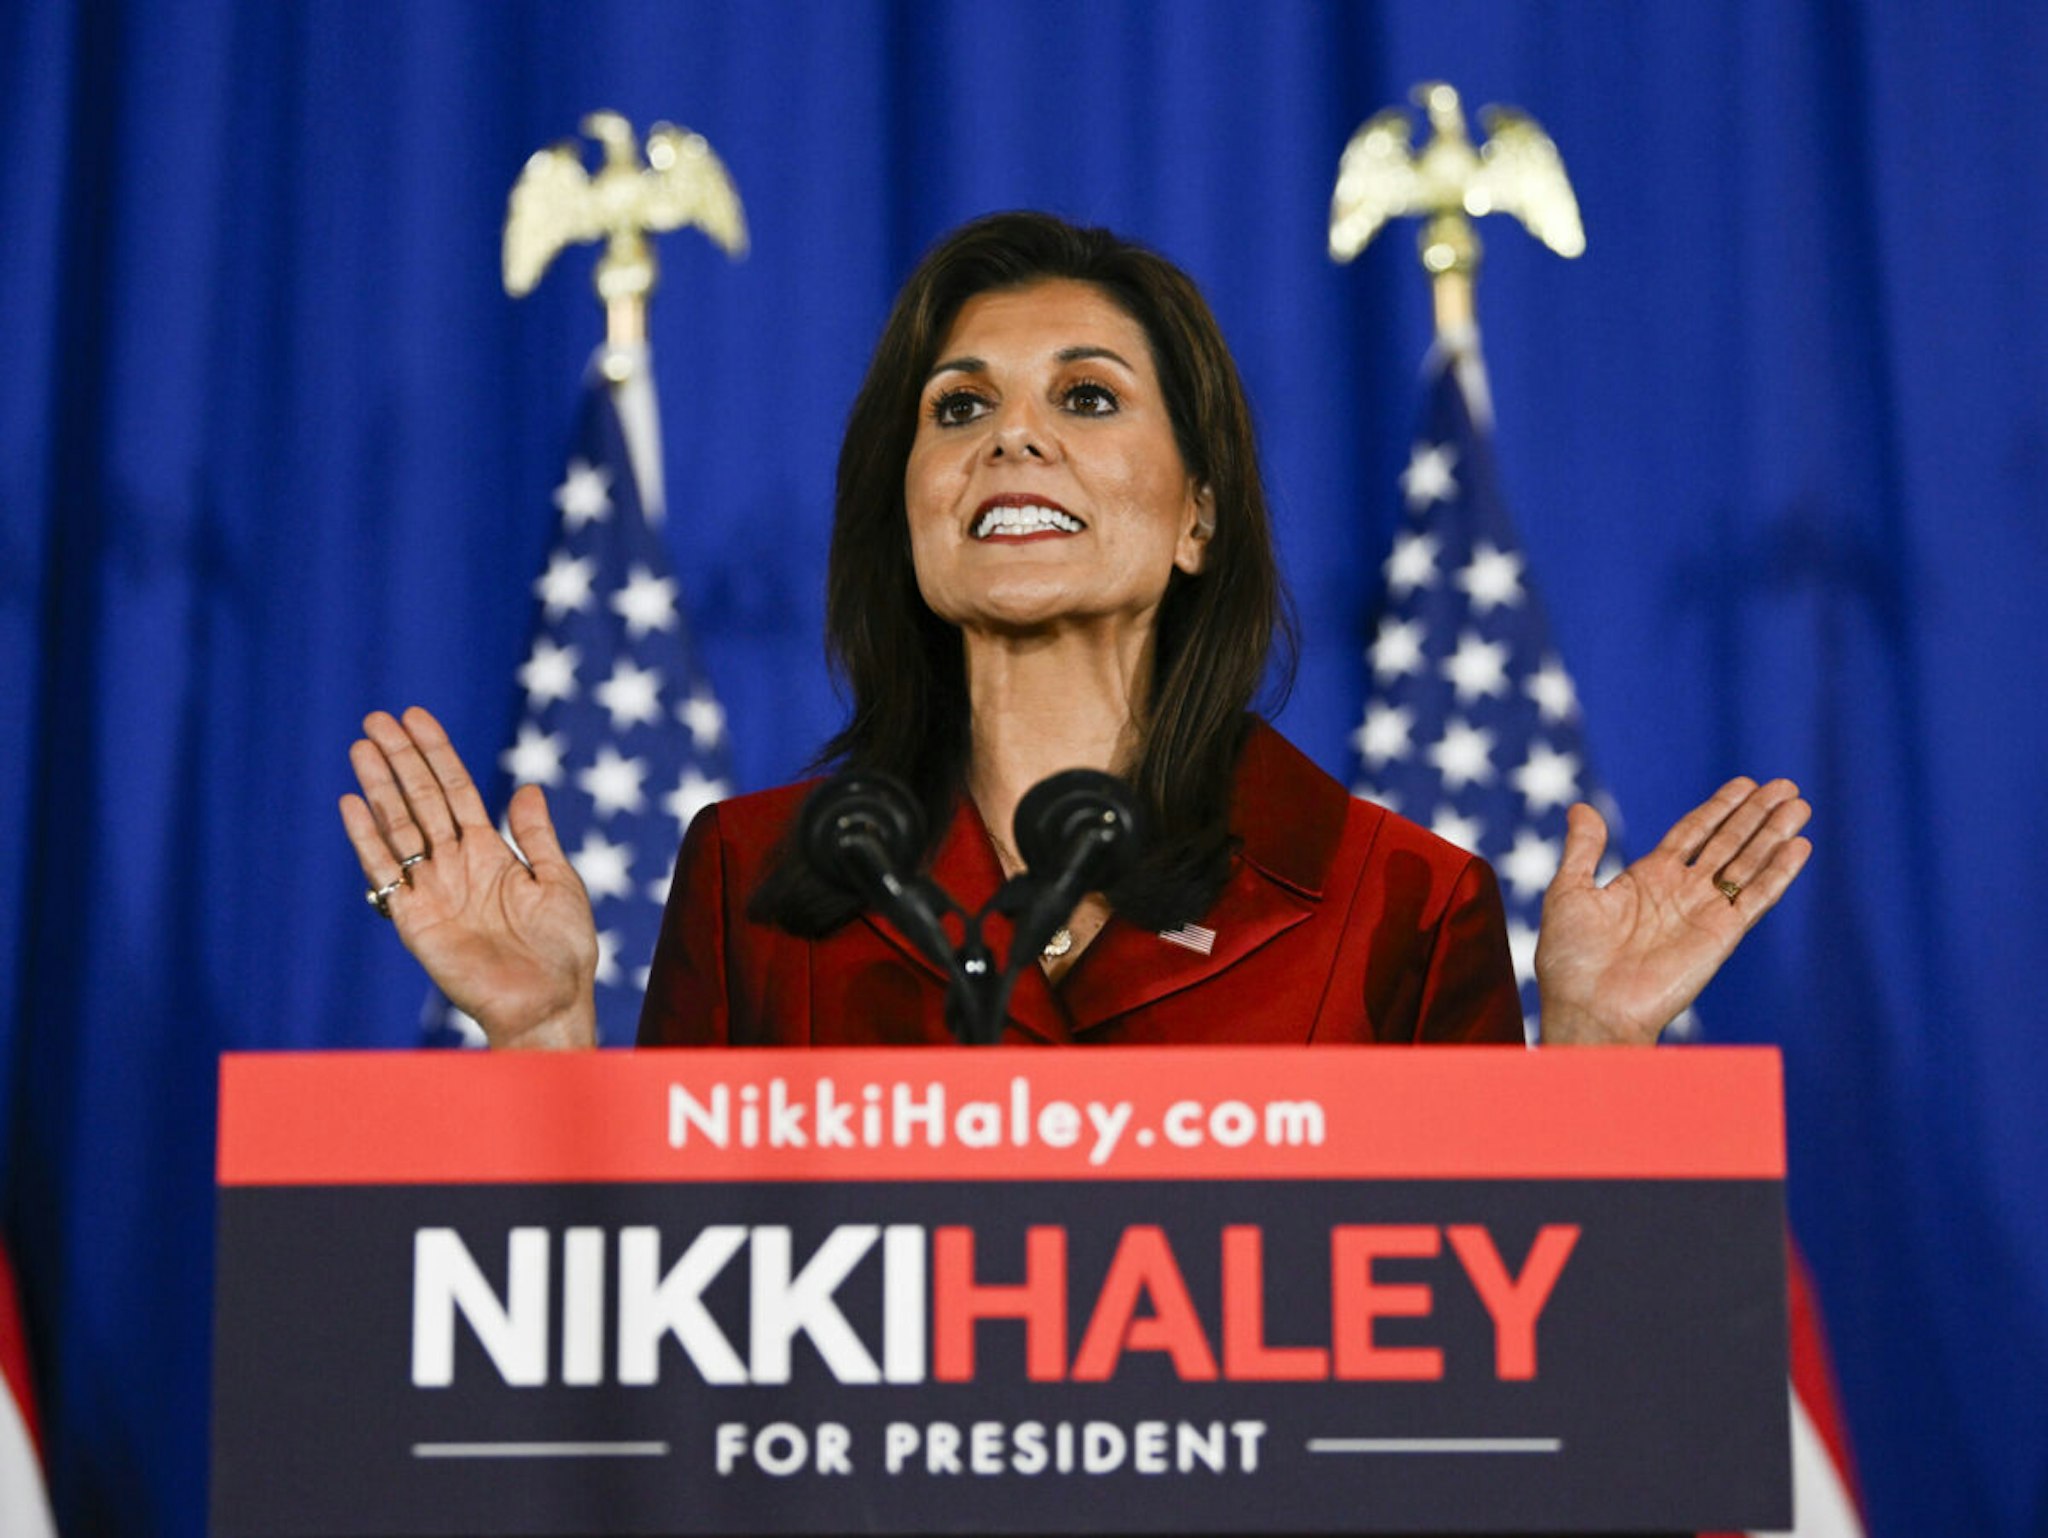 Republican presidential hopeful Nikki Haley speaks at her election night watch party the eve of the primary elections, in Charleston, South Carolina United States on February 24, 2024.